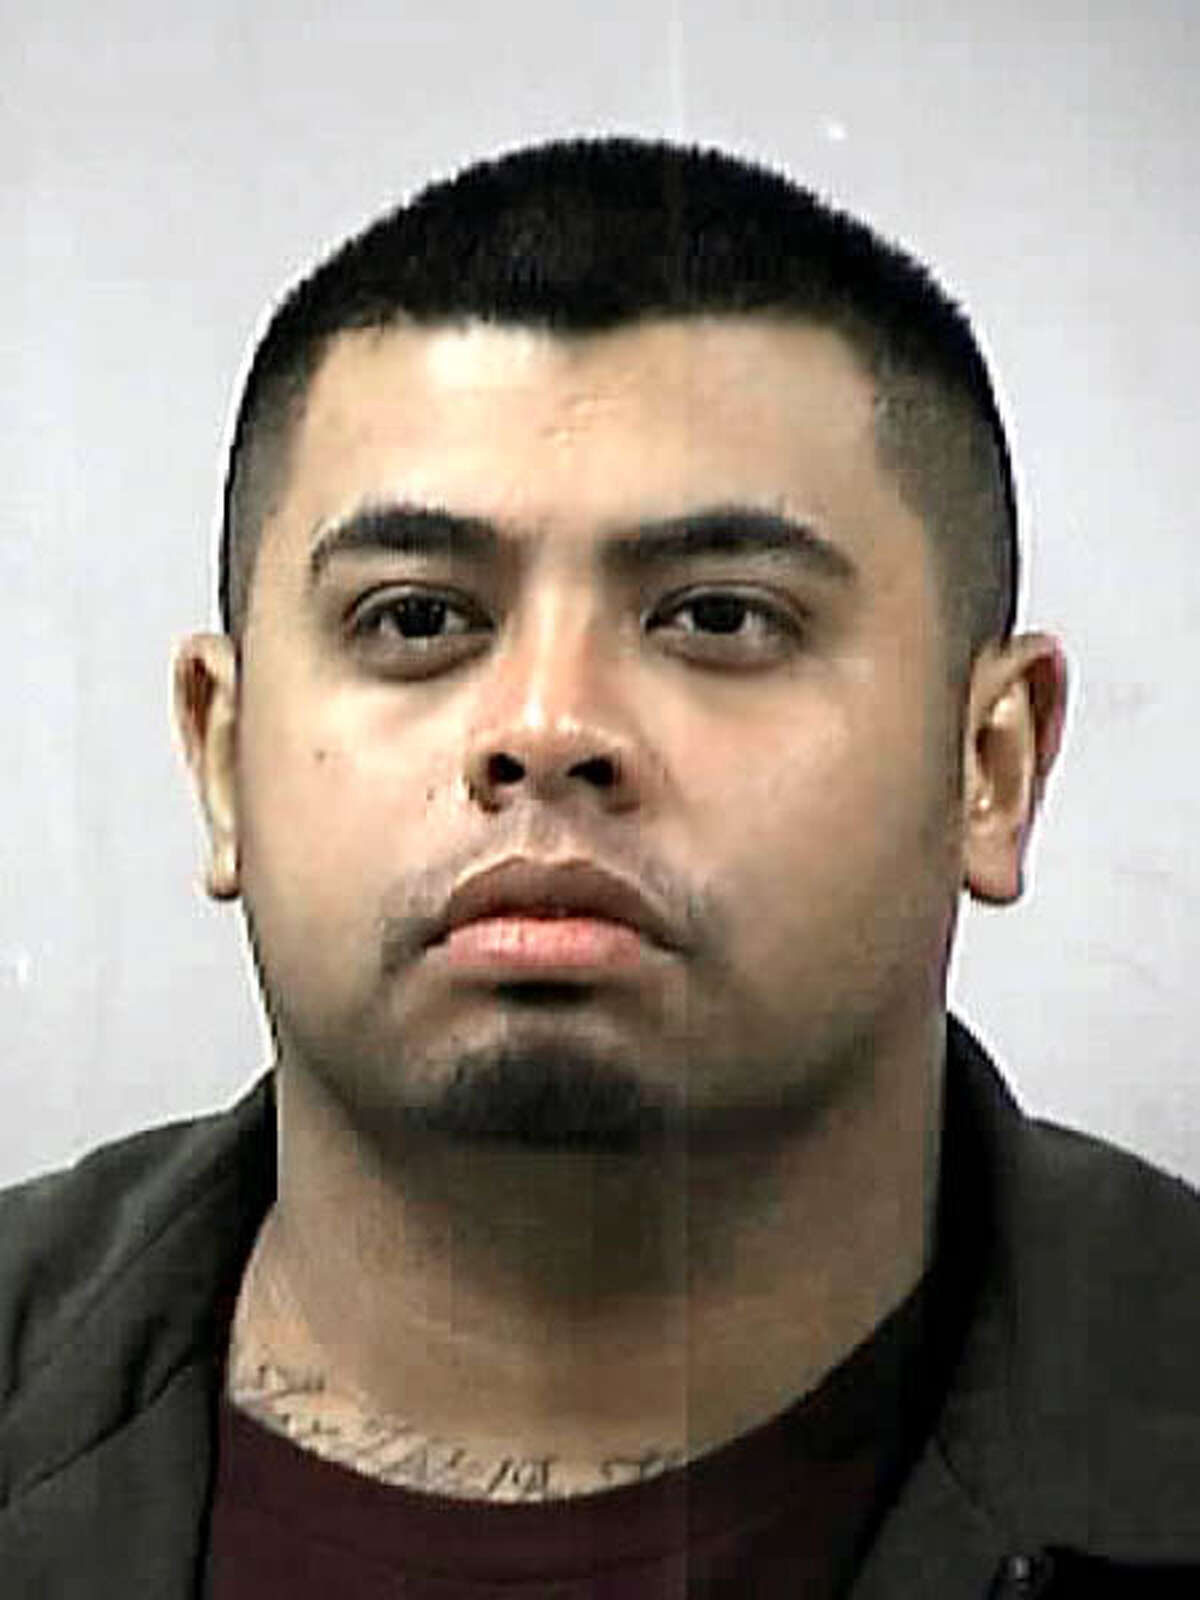 Juan Carlos Rojas, 29, is accused of burglarizing a home with an accomplice who was shot and killed by the homeowner Thursday afternoon.